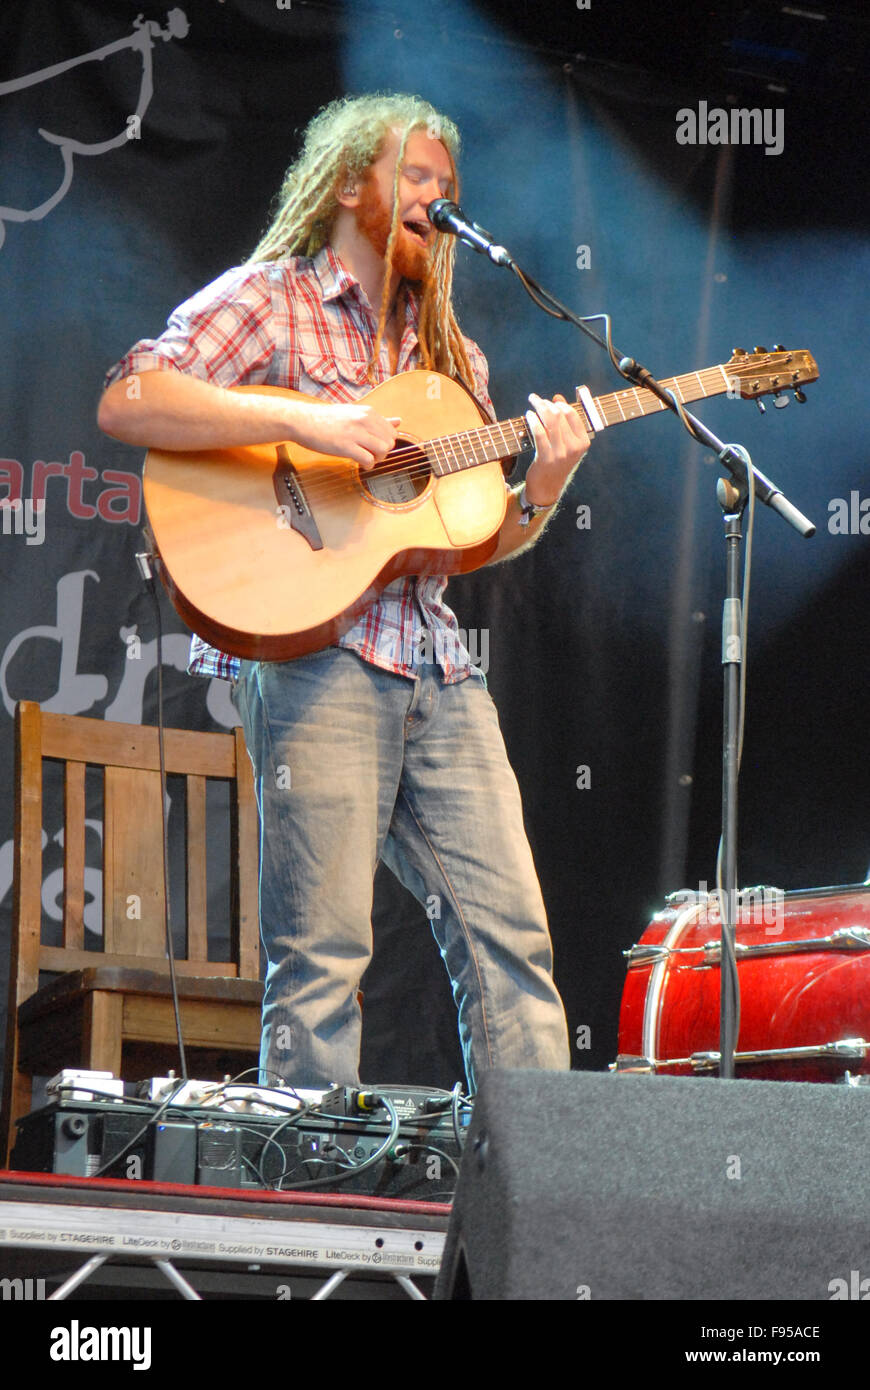 Newton Faulkner performs at Belladrum Tartan Heart festival in Inverness, Scotland on 6th August 2011. Stock Photo